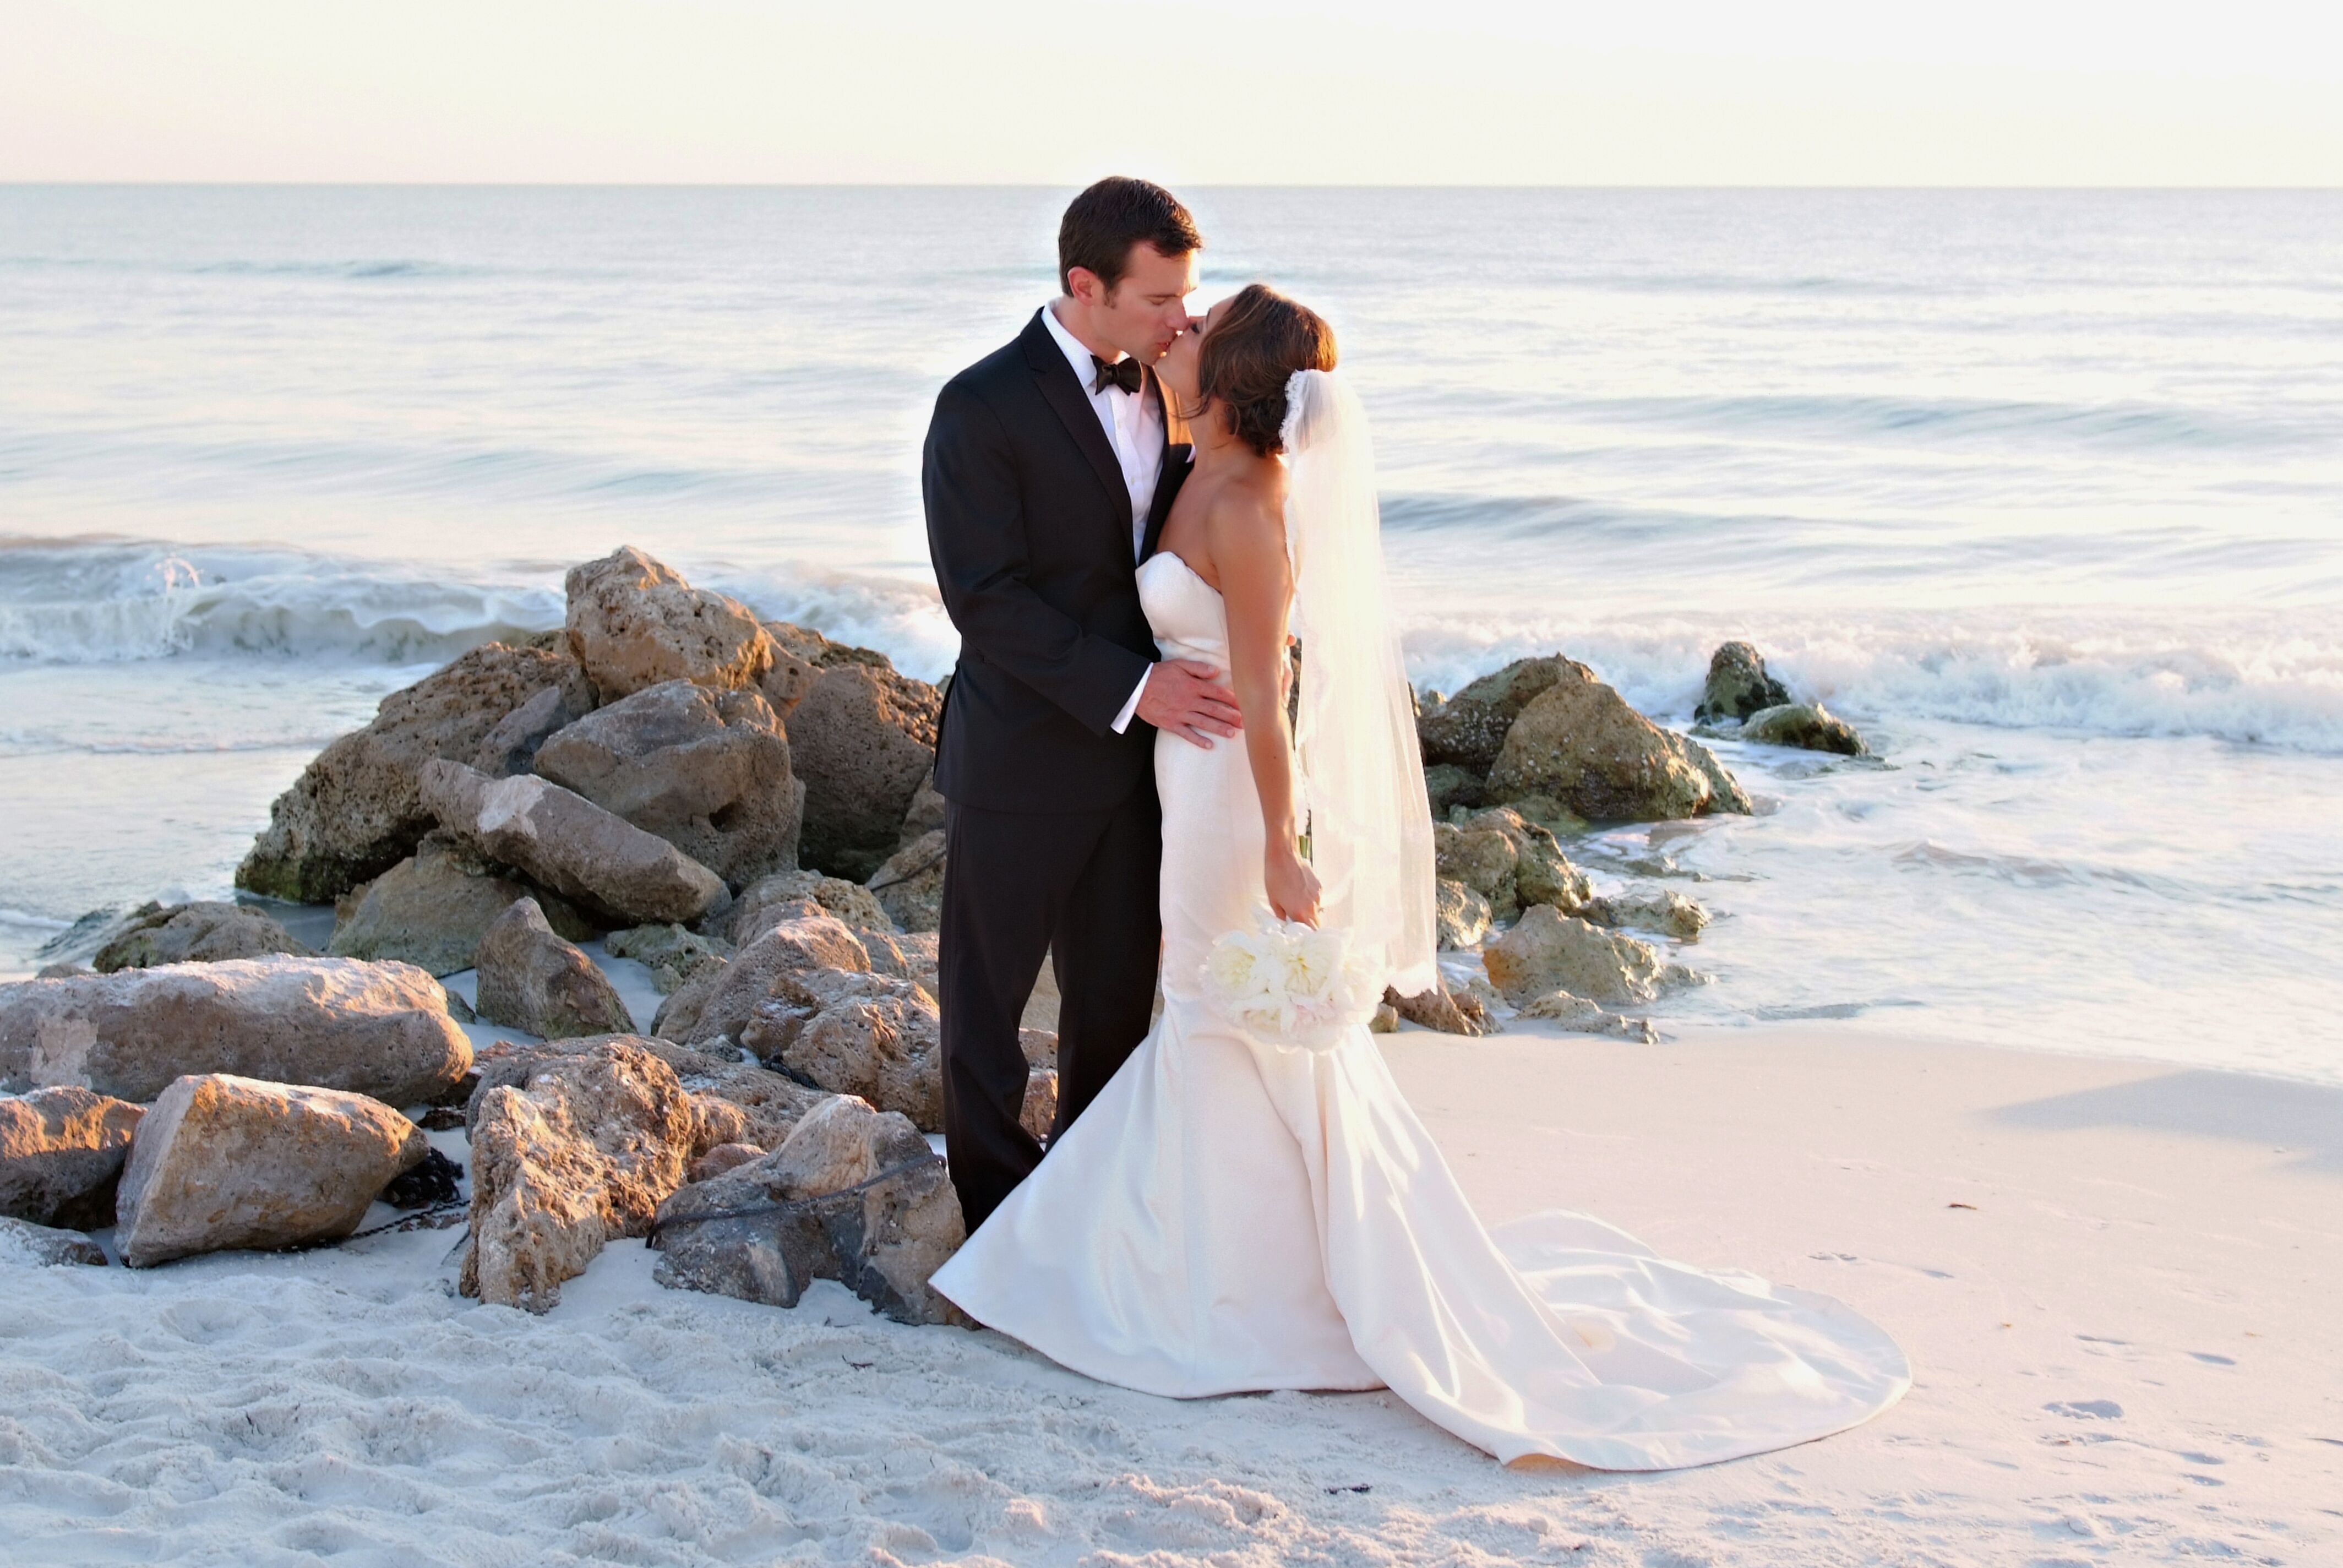 A Traditional Beach Wedding At The Naples Hotel And Golf Club In